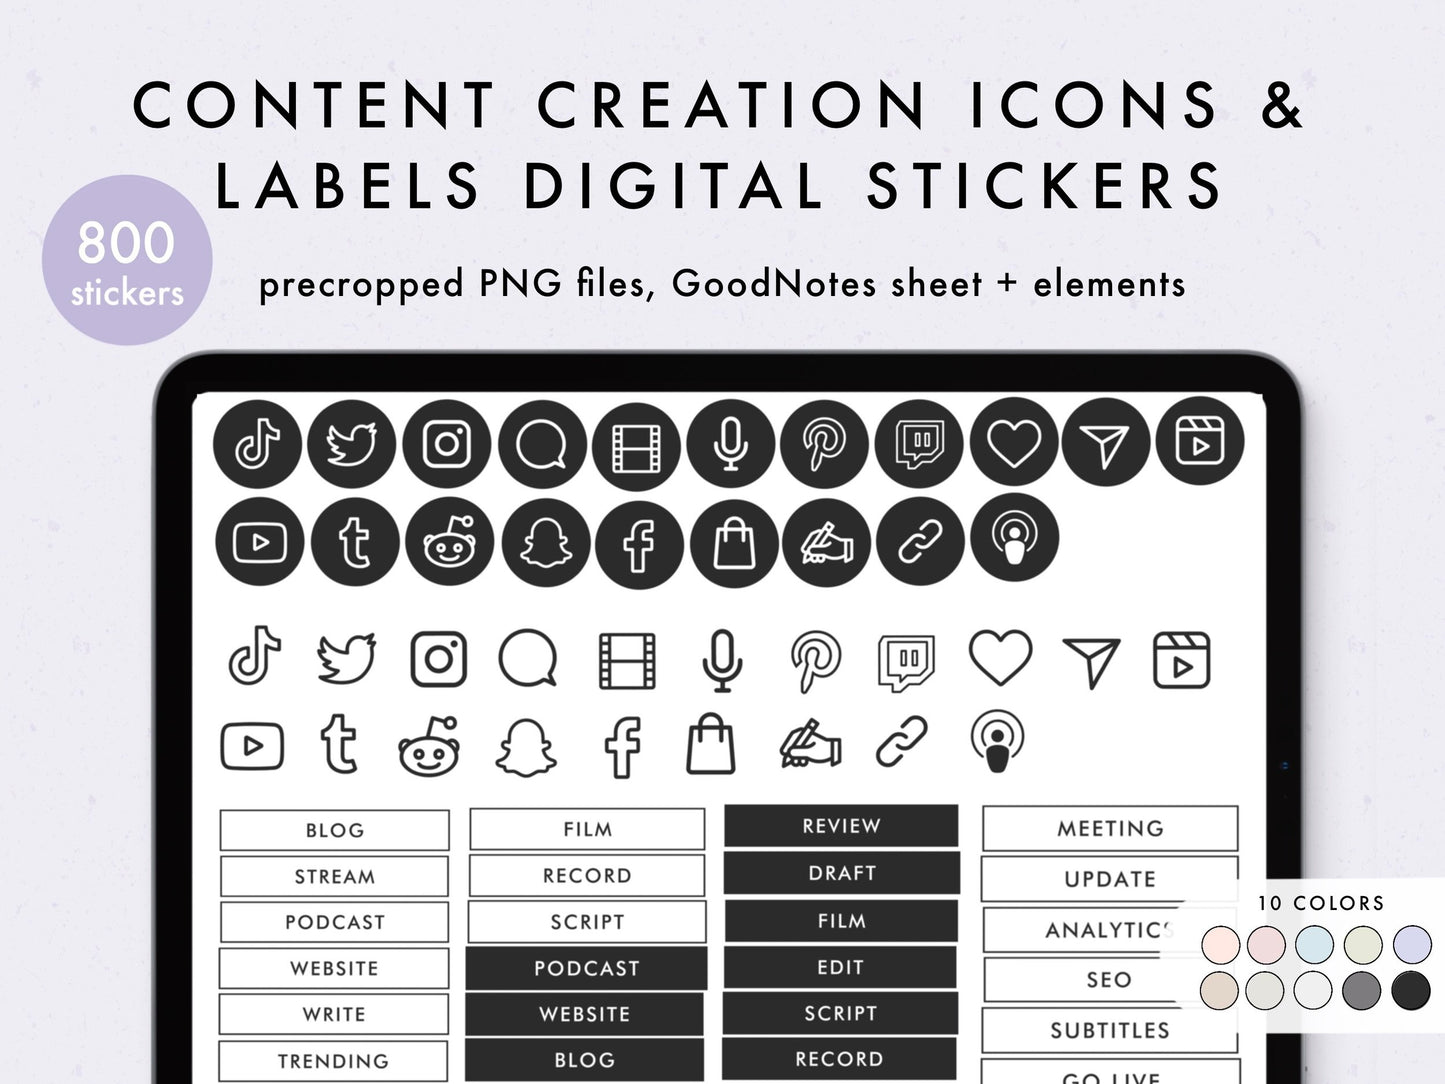 Content Creation Icons & Labels